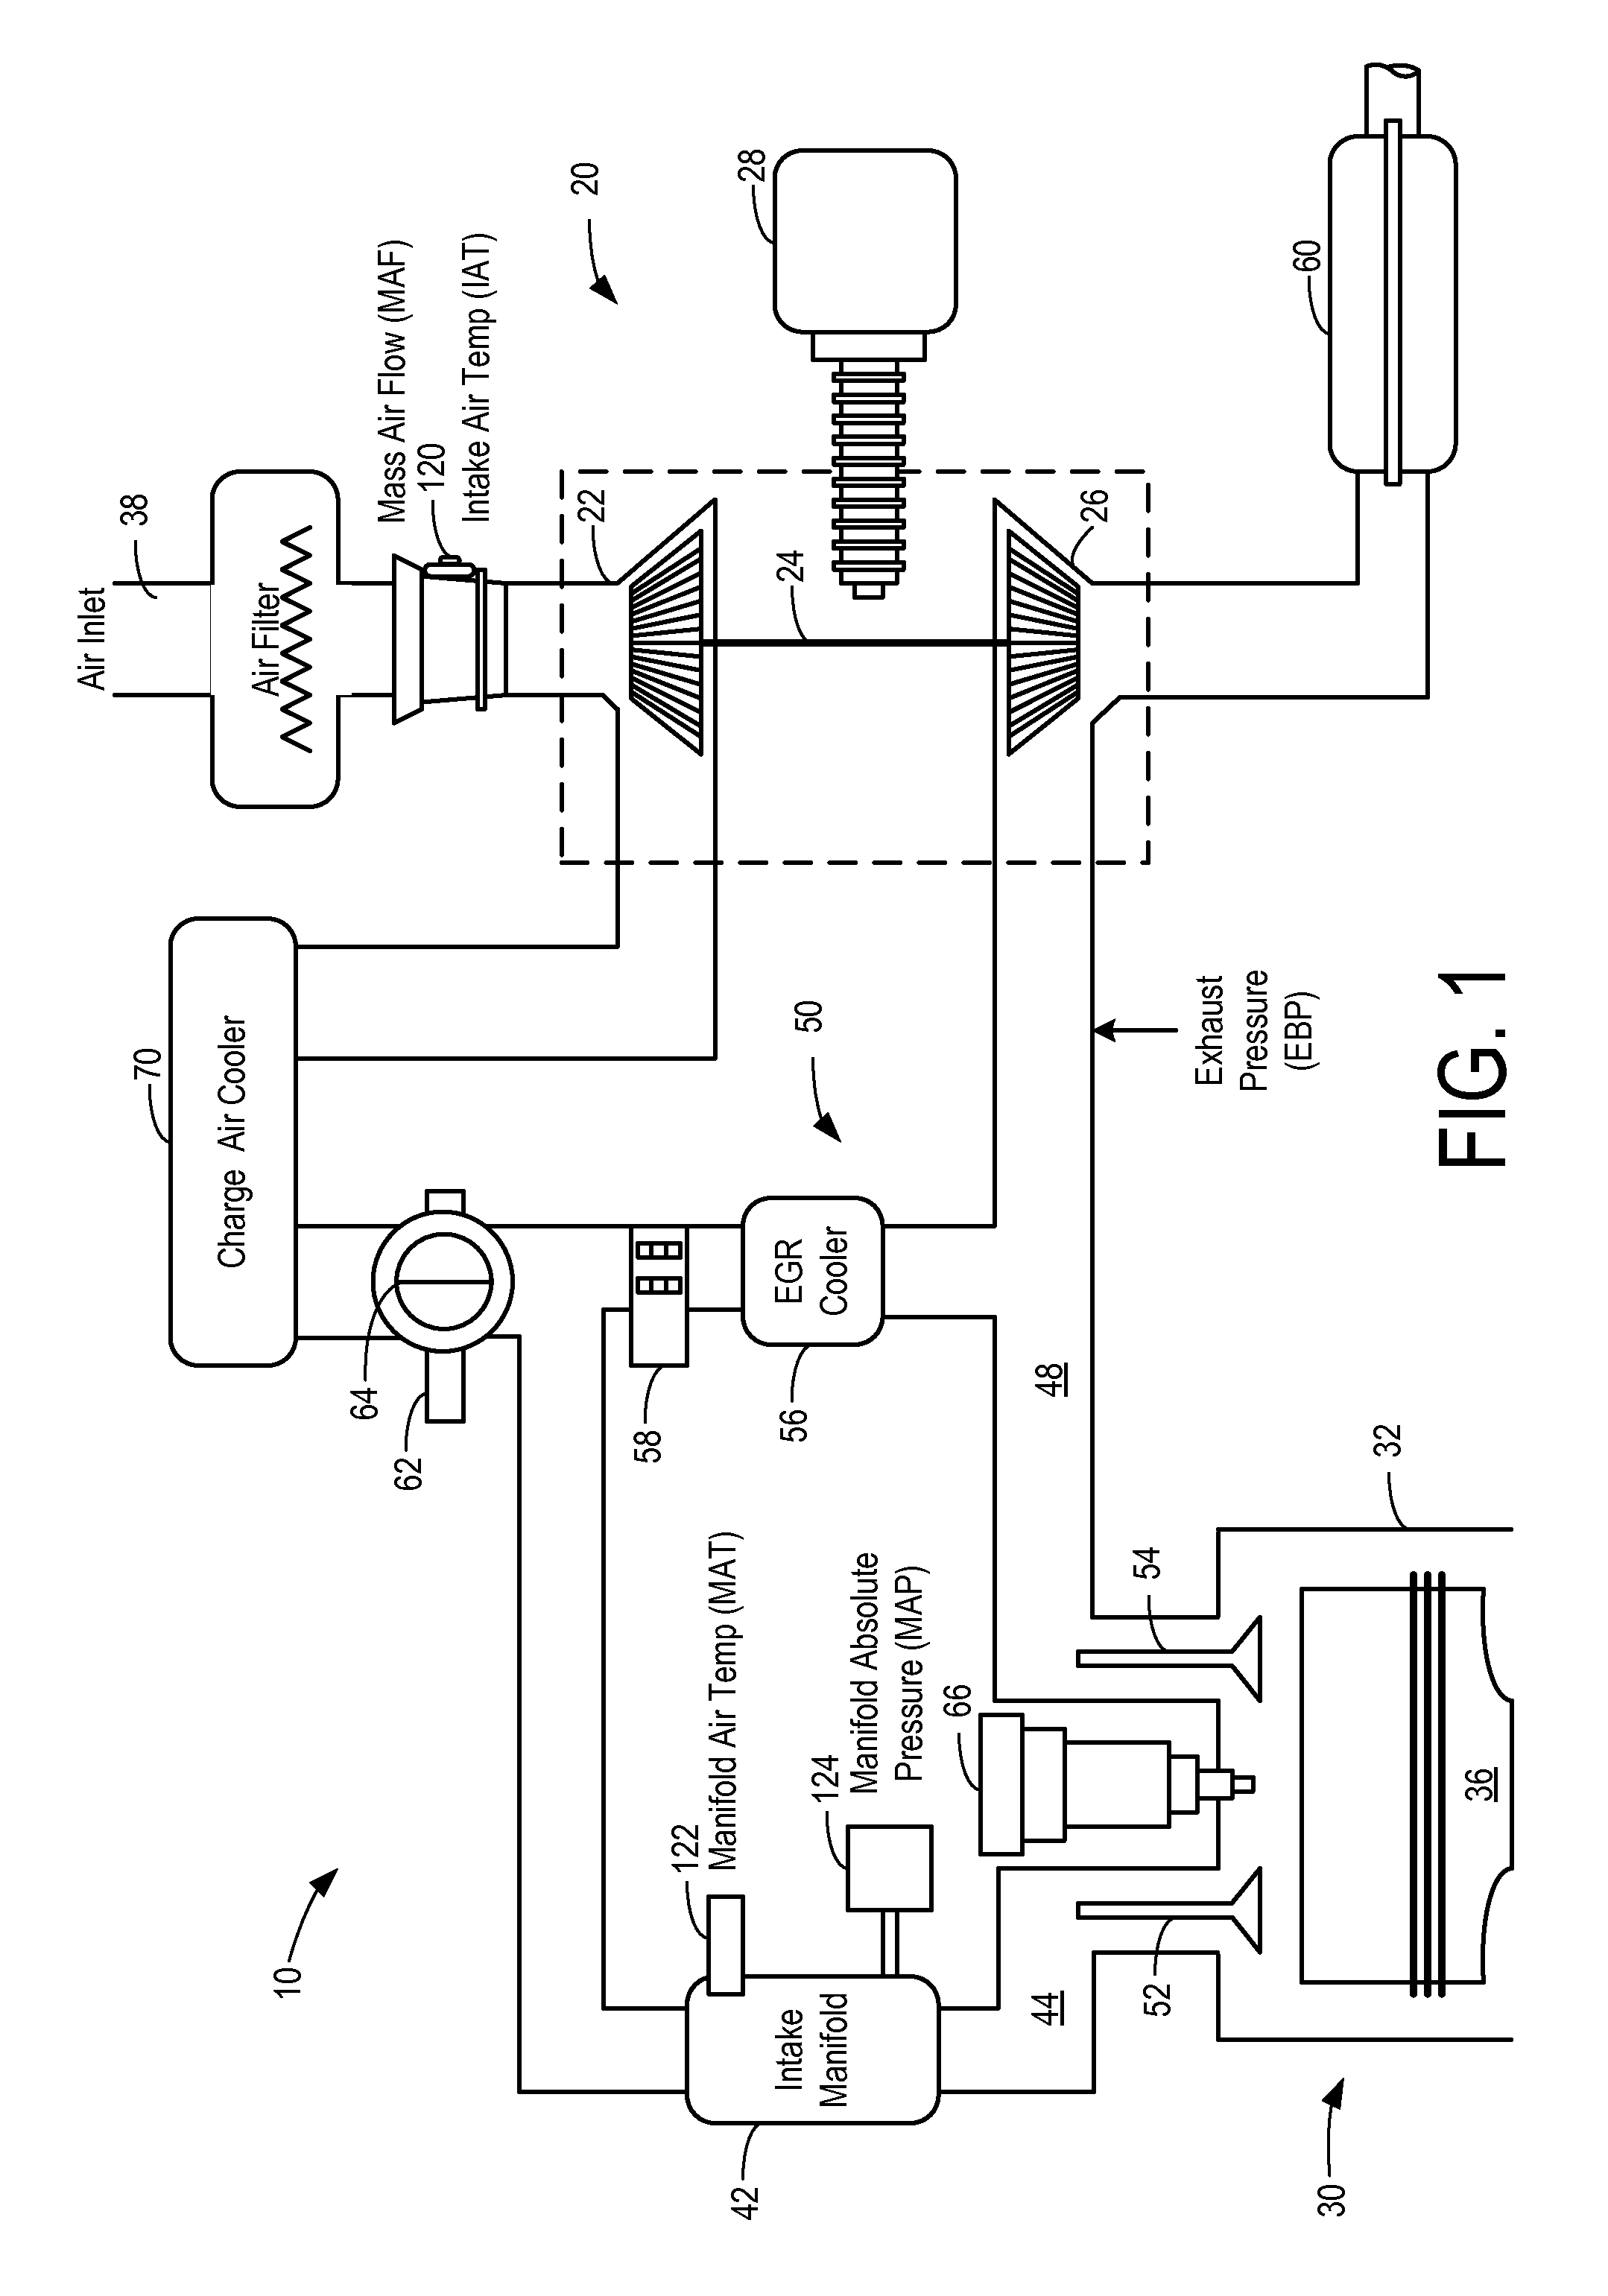 Adaptive learning system and method of vane position for a variable geometry turbocharger